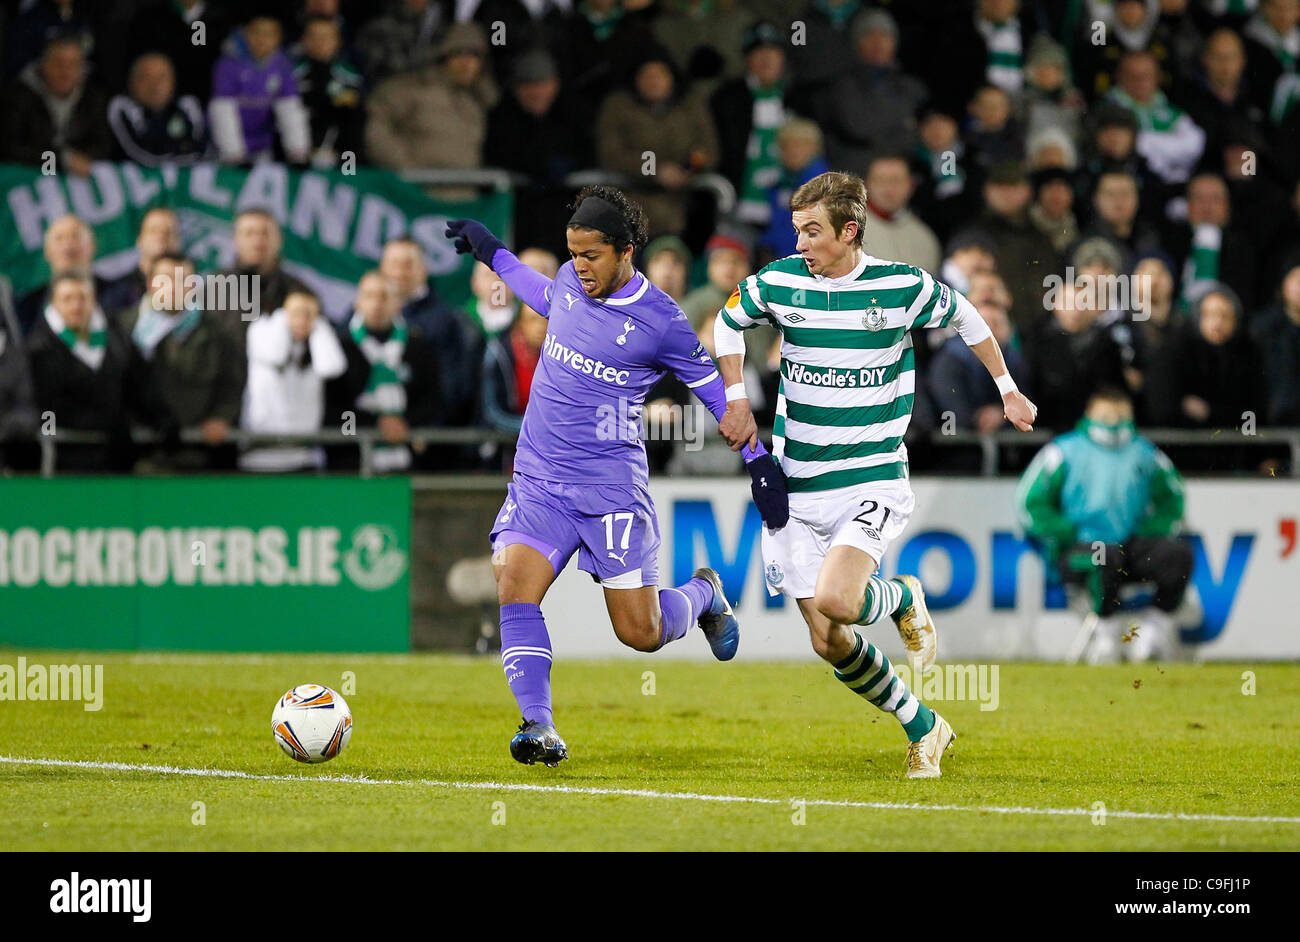 15.12.2011 Tallaght Stadium, Dublin, Ireland. Giovani dos Santos (Tottenham Hotspur)  charges towards the box chased by Ronan Finn (Shamrock Rovers)  during the Europa League game between Shamrock Rovers and Tottenham Hotspur. Stock Photo